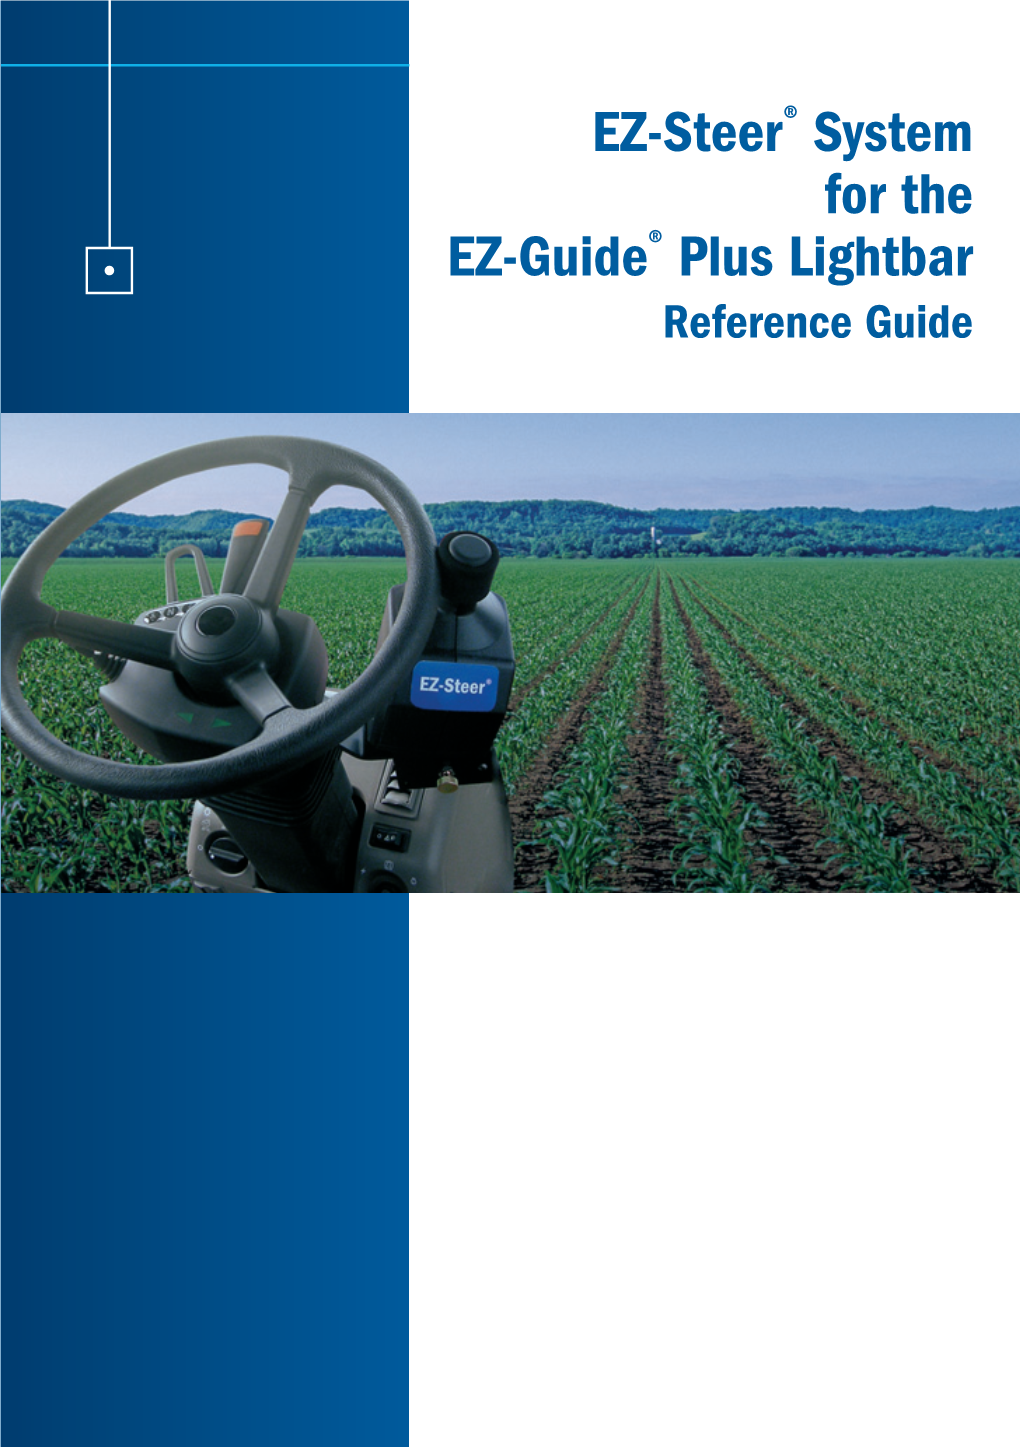 EZ-Steer System for the EZ-Guide Plus Lightbar Reference Guide